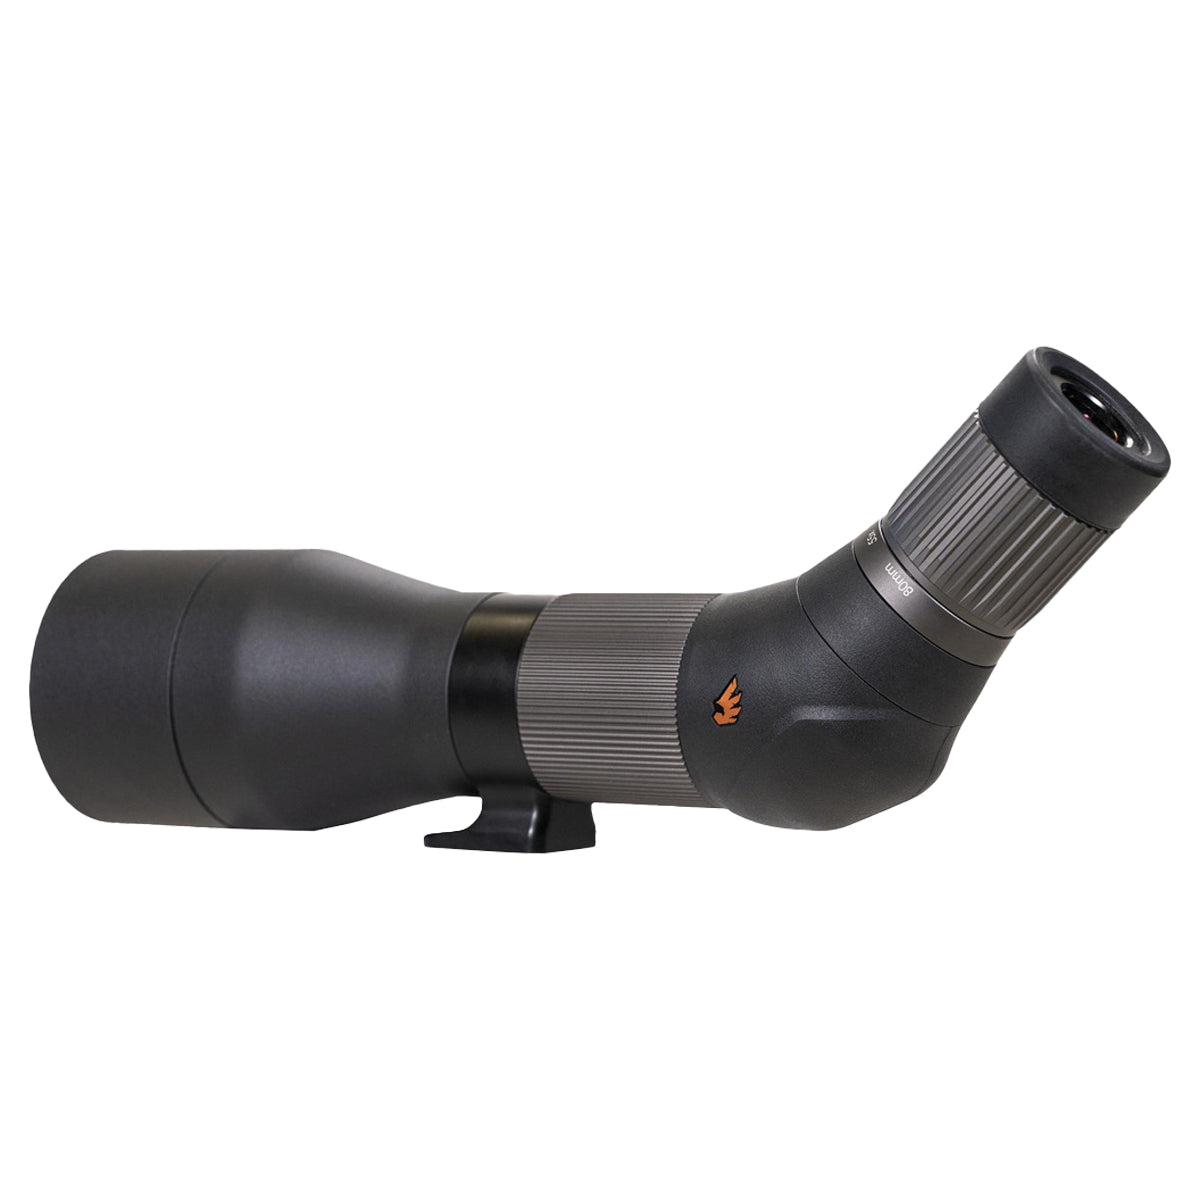 Revic Acura S80a Angled Spotting Scope